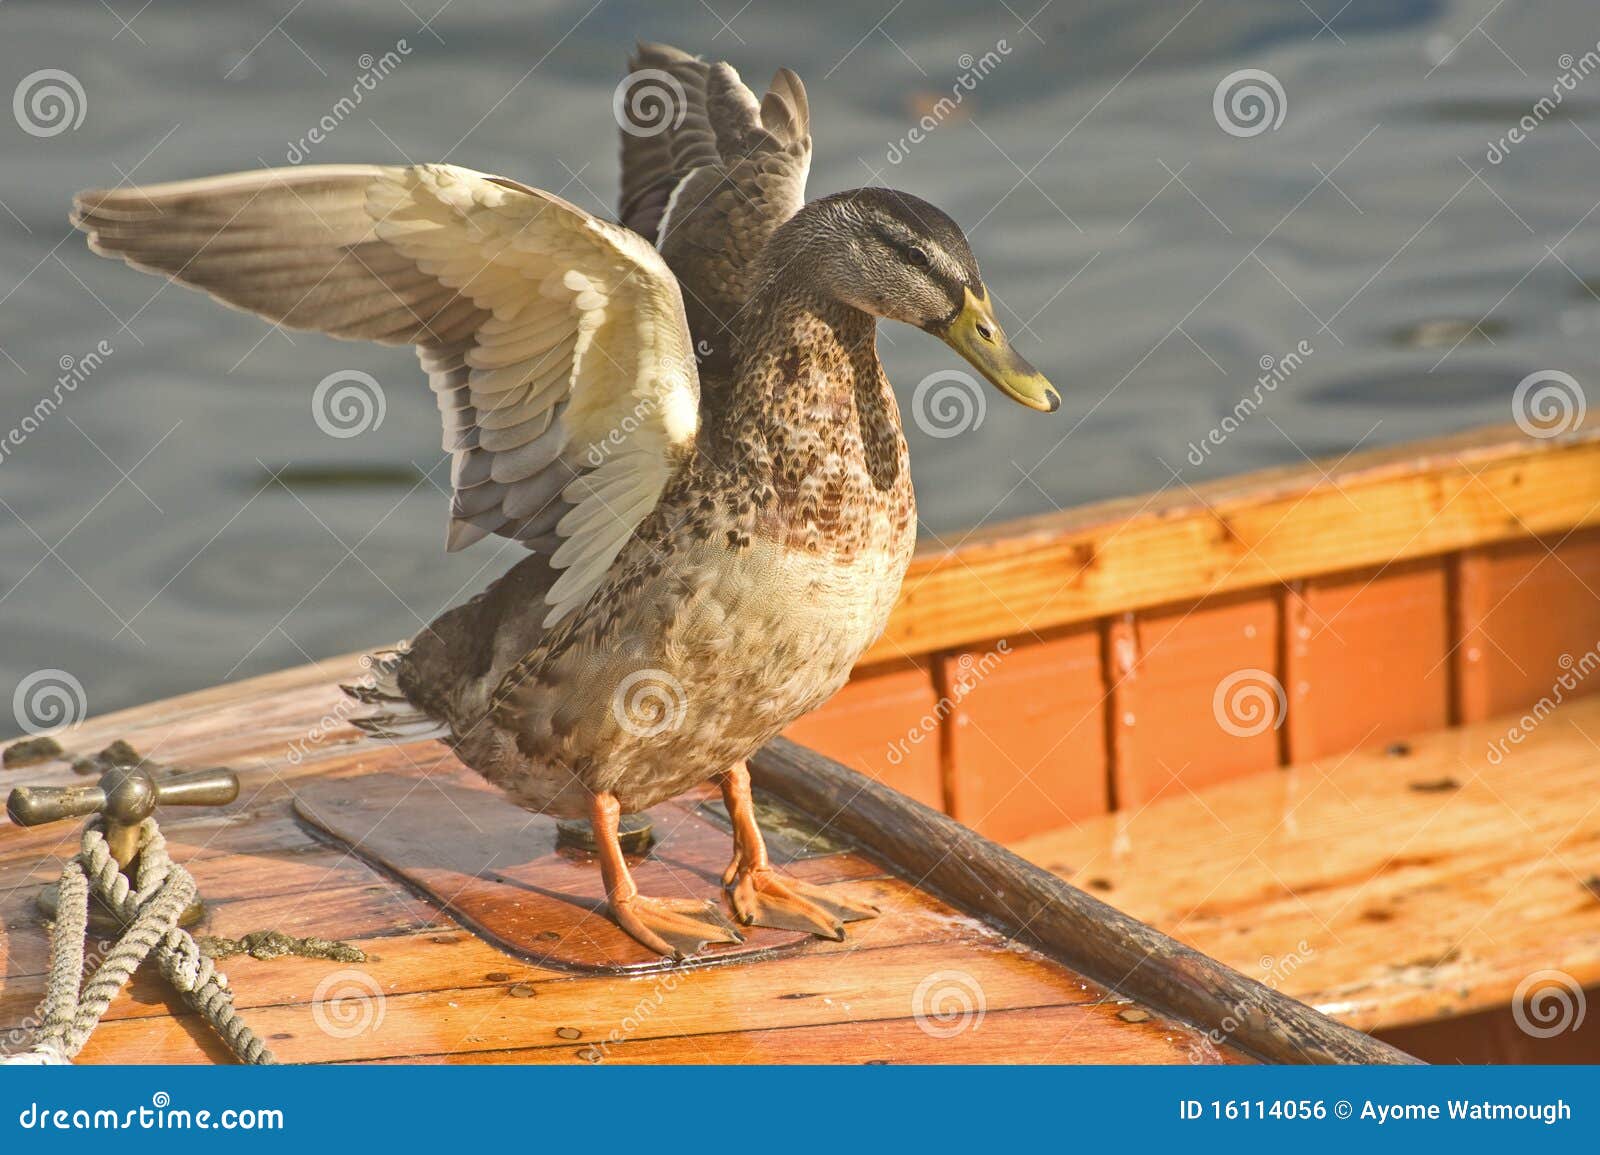 An image of a duck on a boat extending its wings prior to flight.